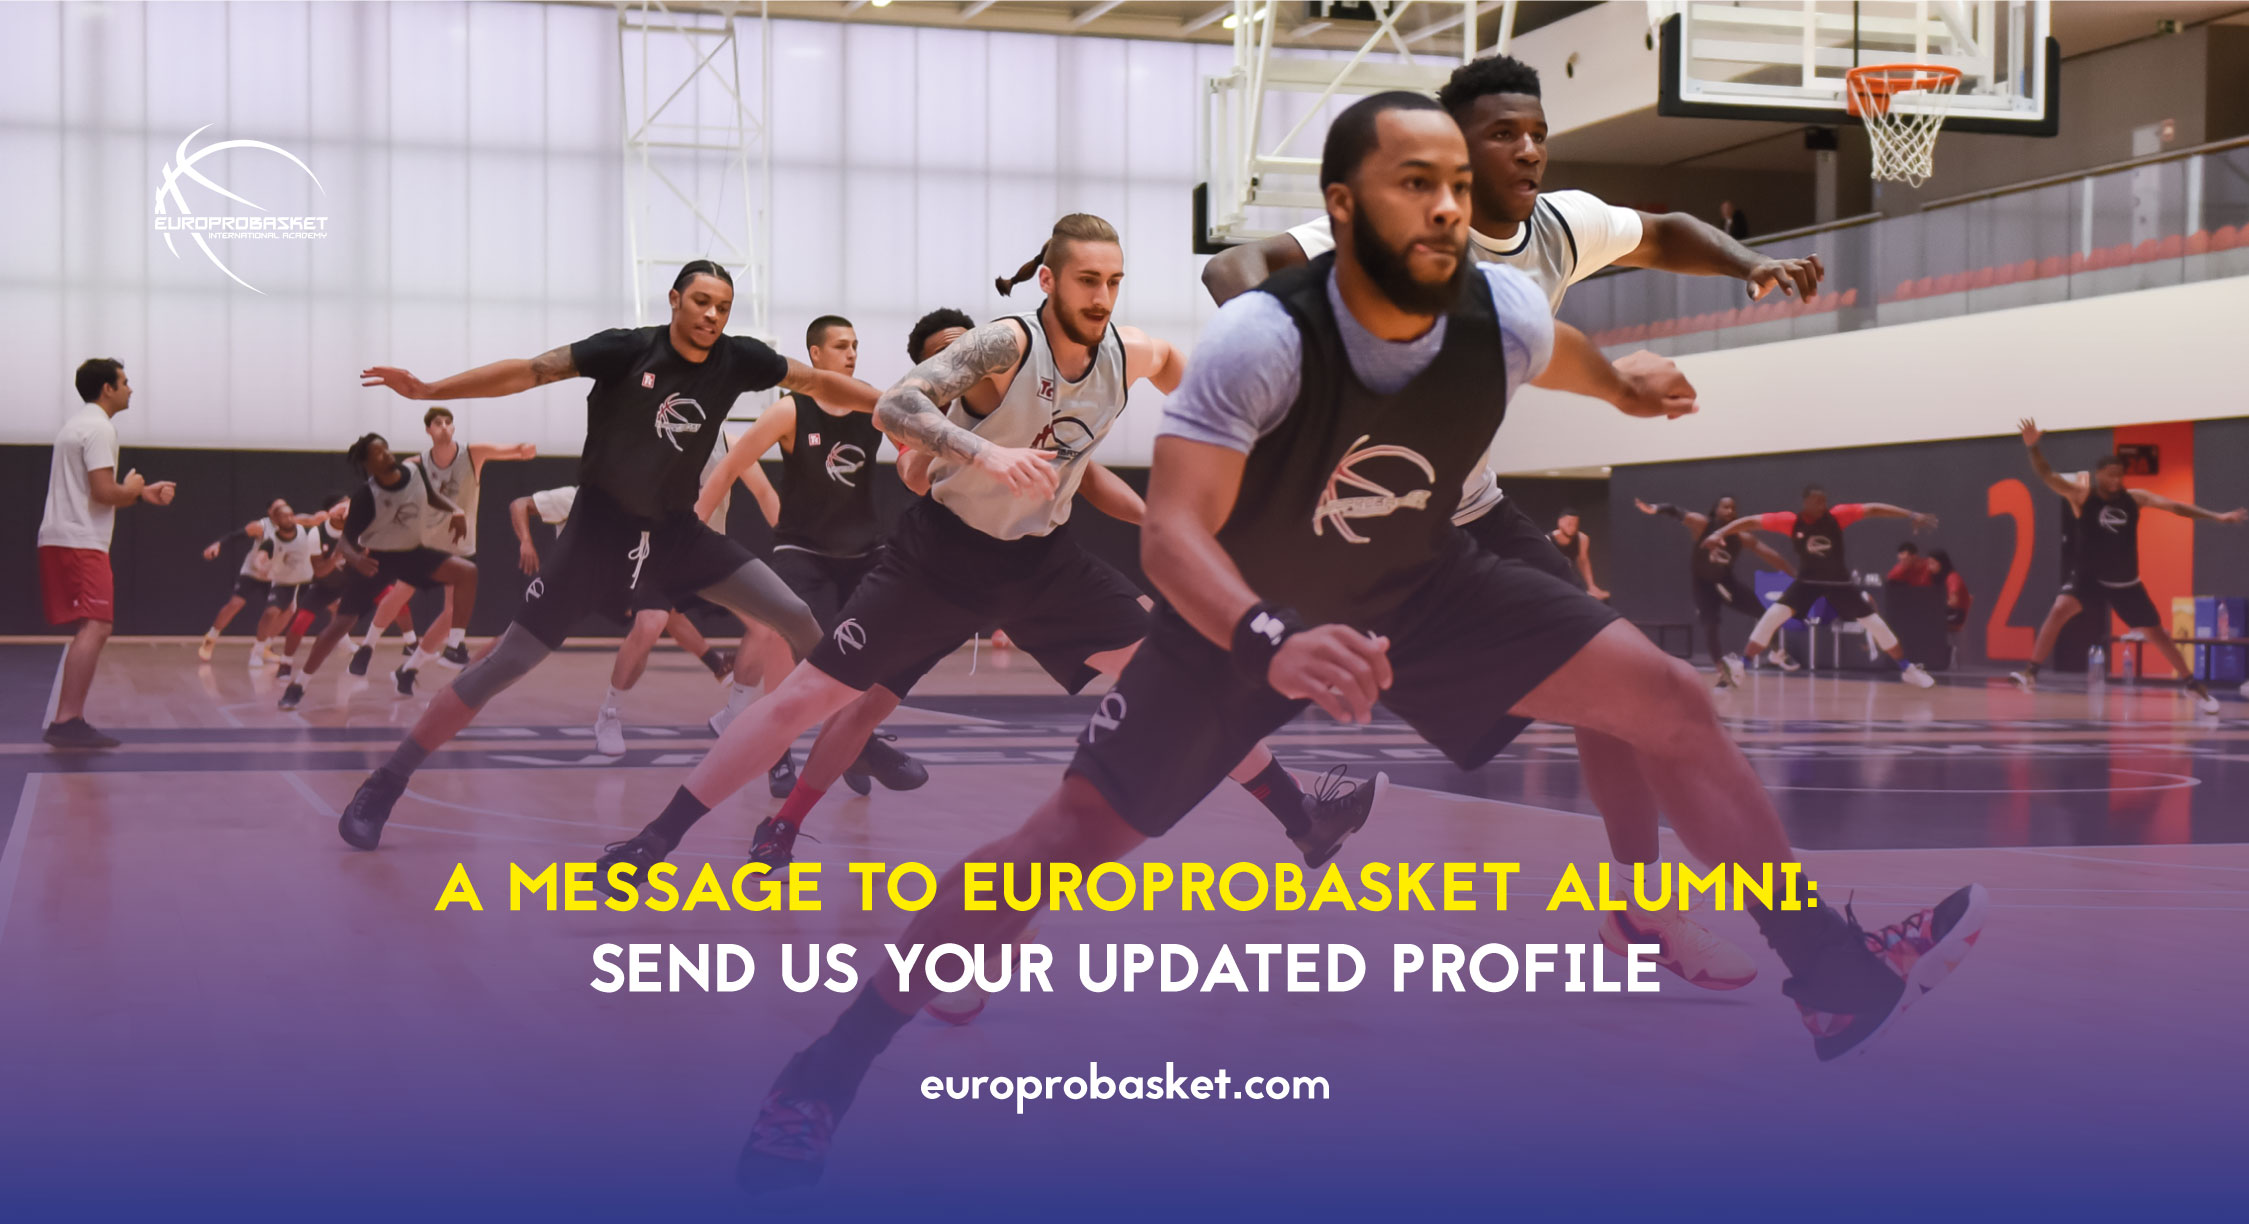 A MESSAGE TO EUROPROBASKET ALUMNI: SEND US YOUR UPDATED PROFILE